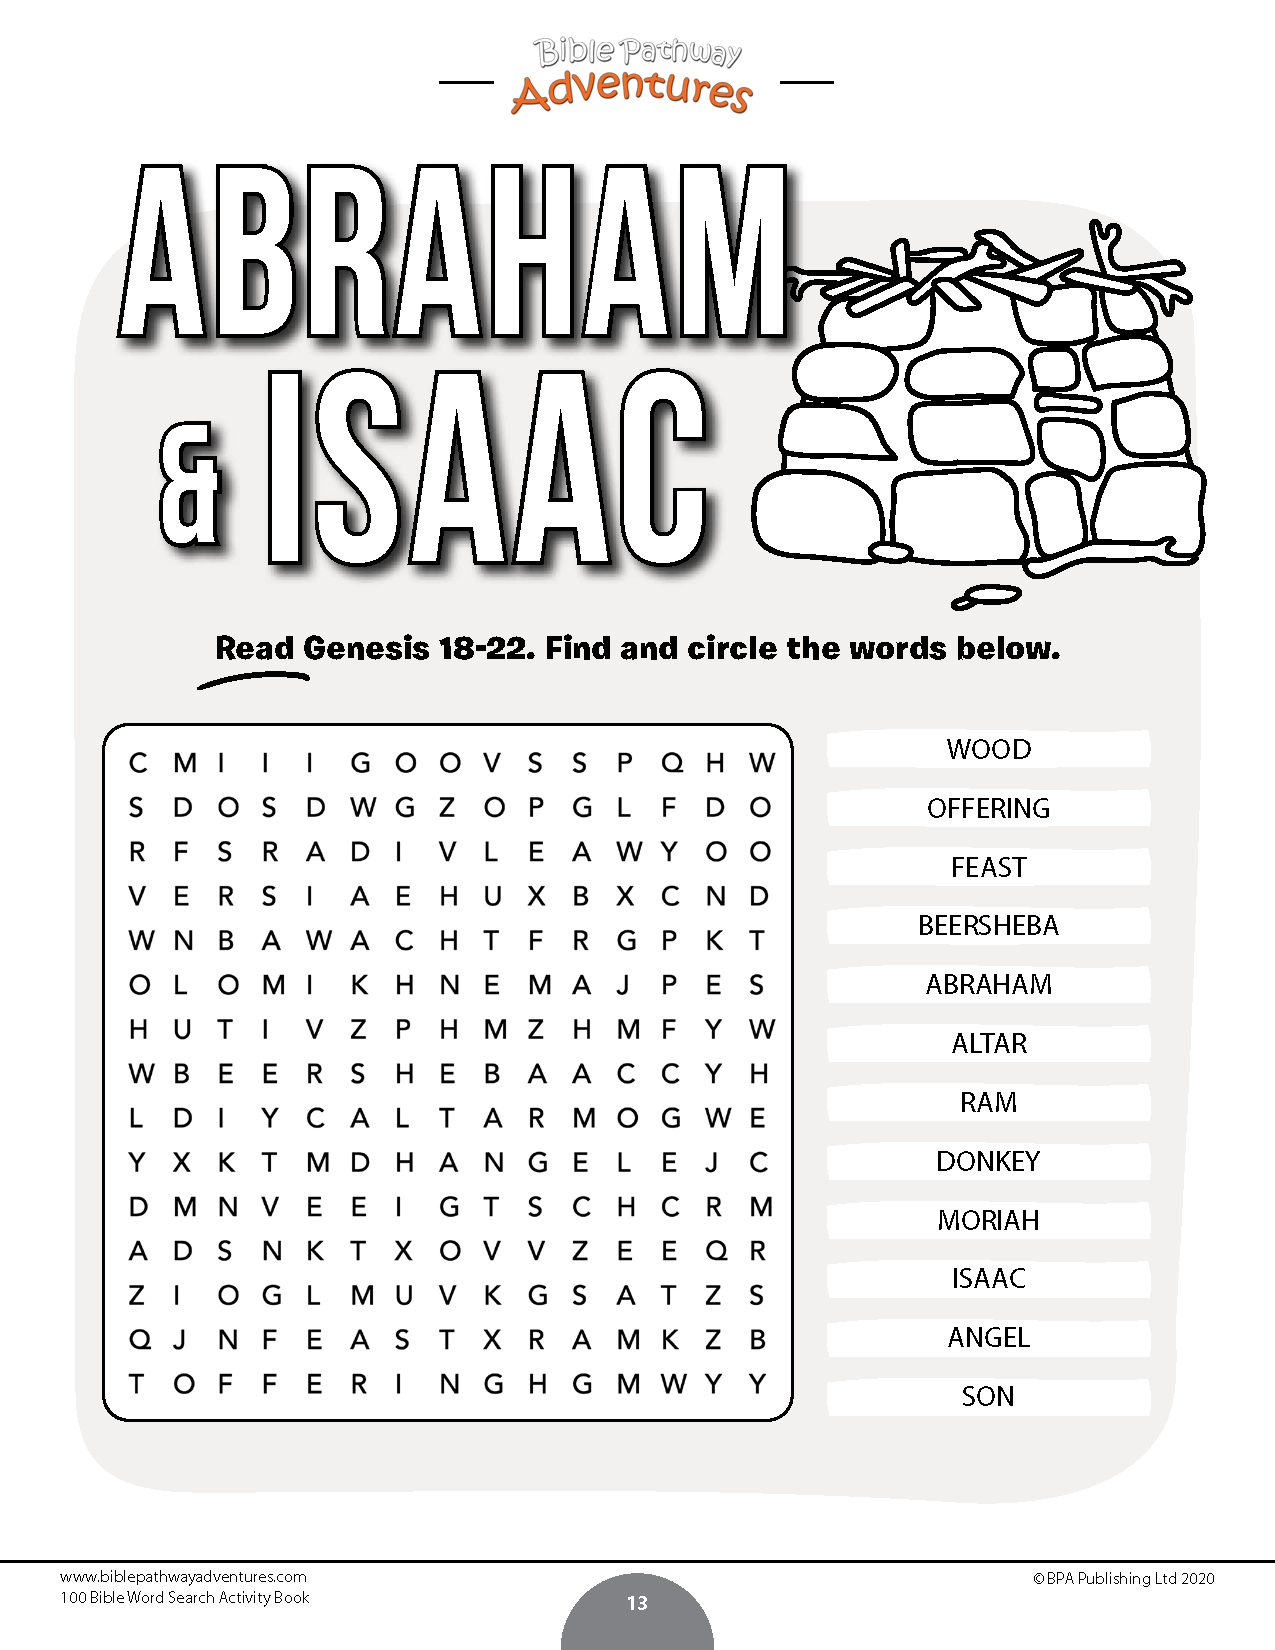 100 Bible Word Search Activity Book (paperback)